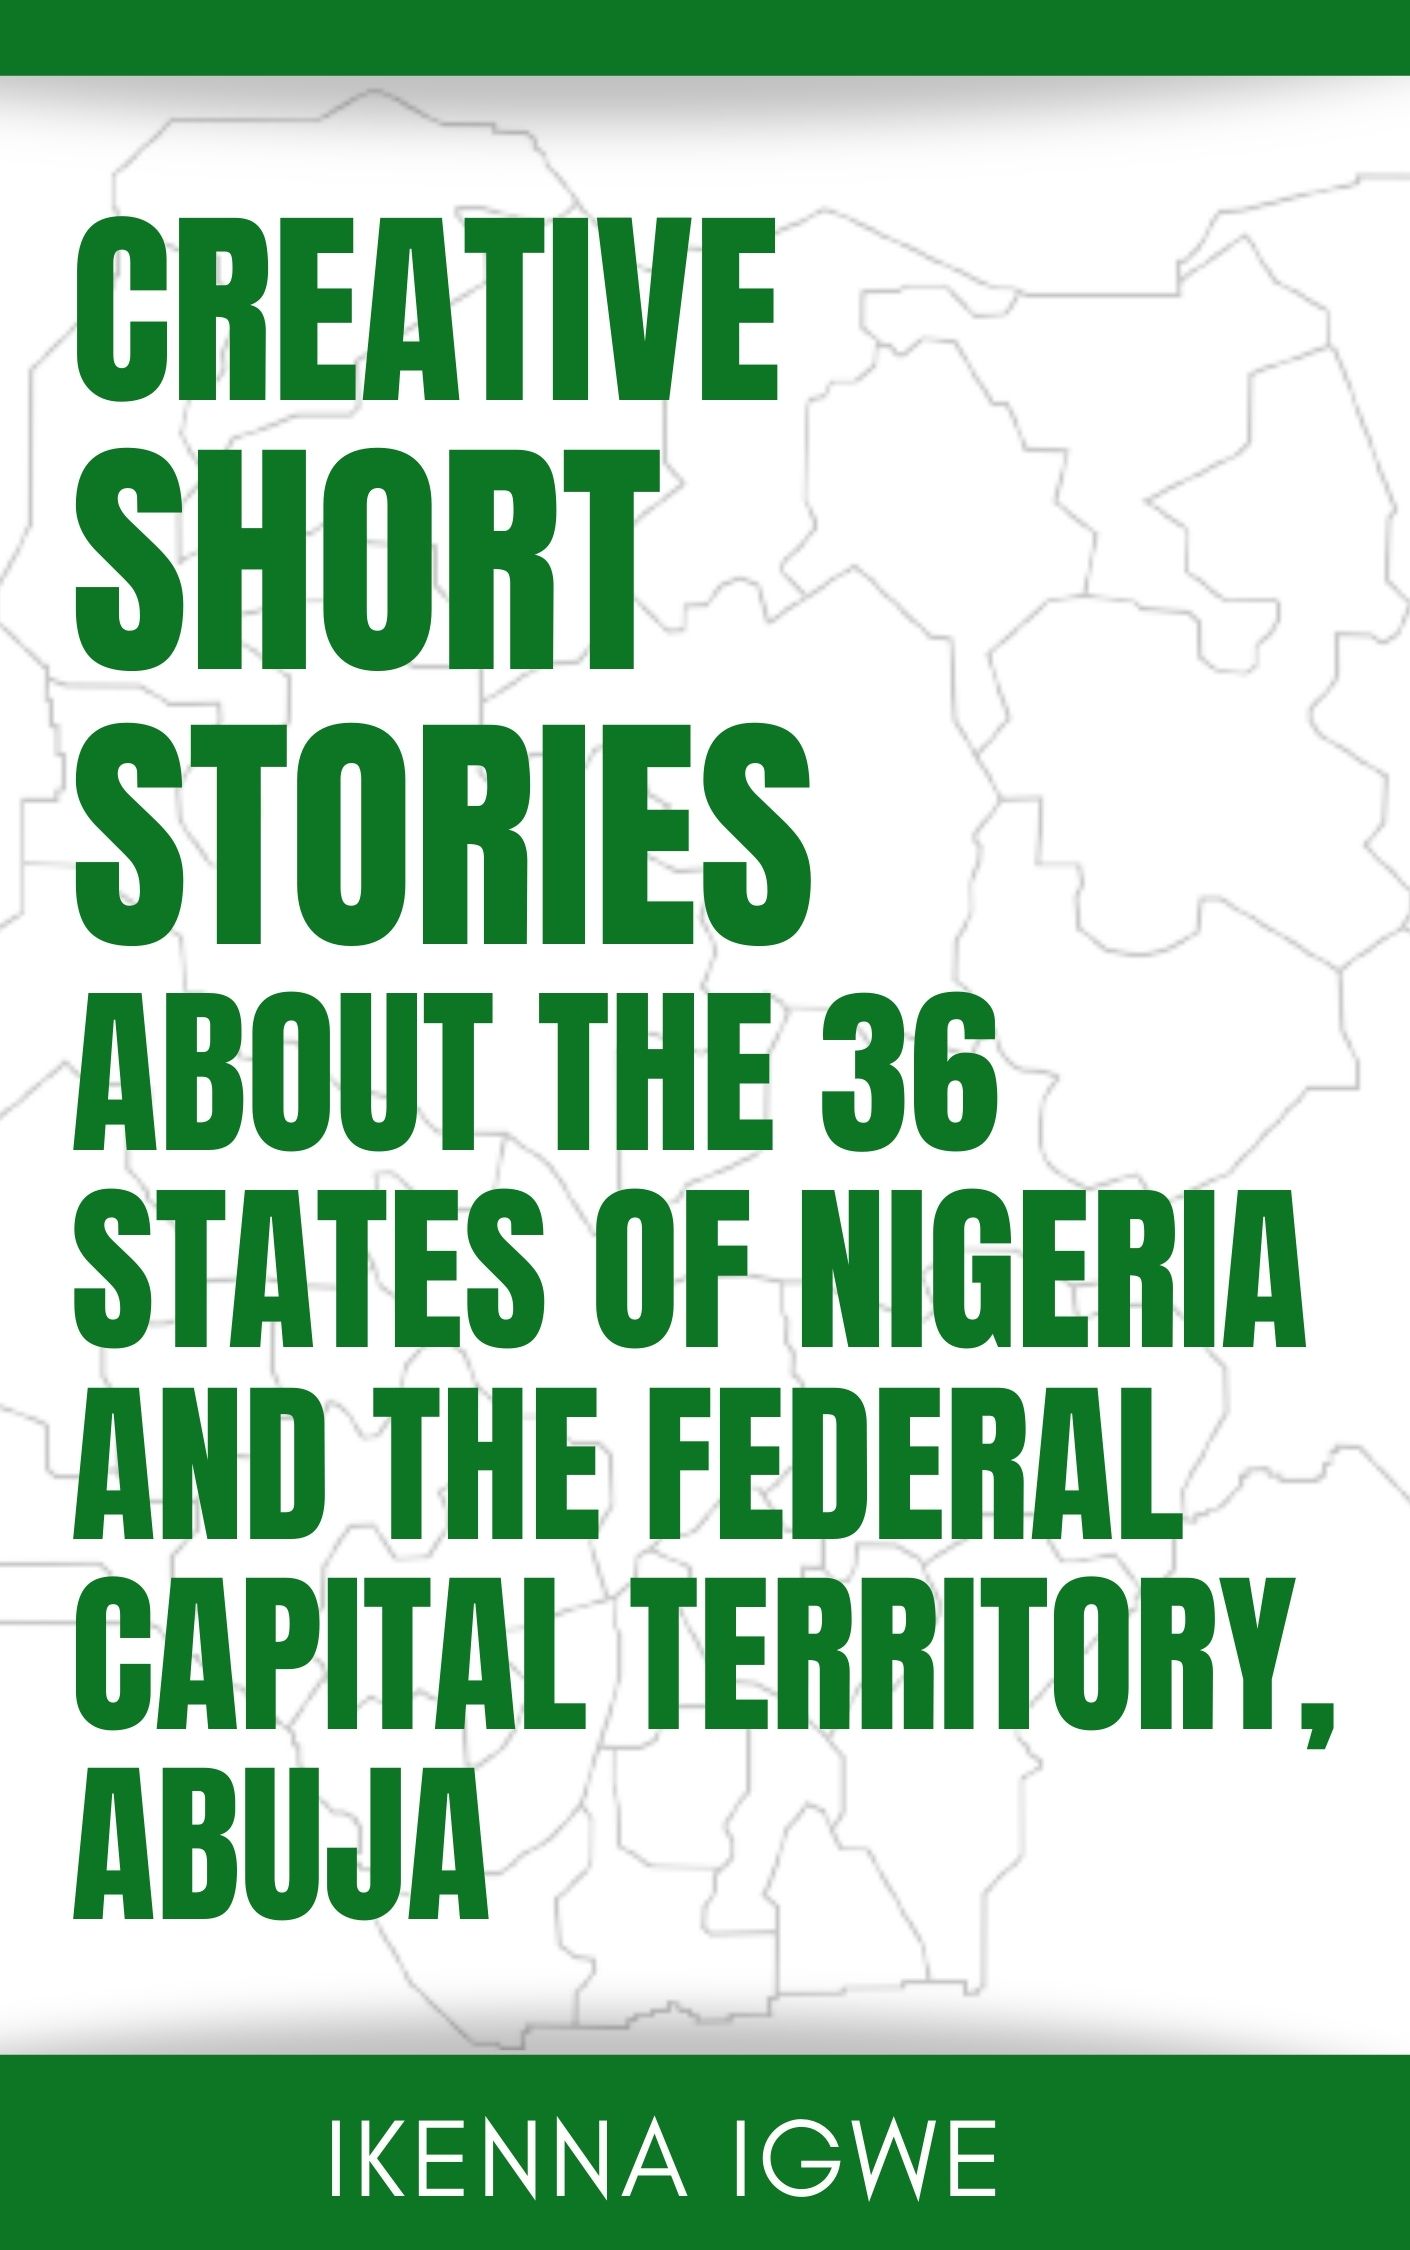 Creative-Short-Stories-About-The-36-States-Of-Nigeria-And-The-FCT-Abuja